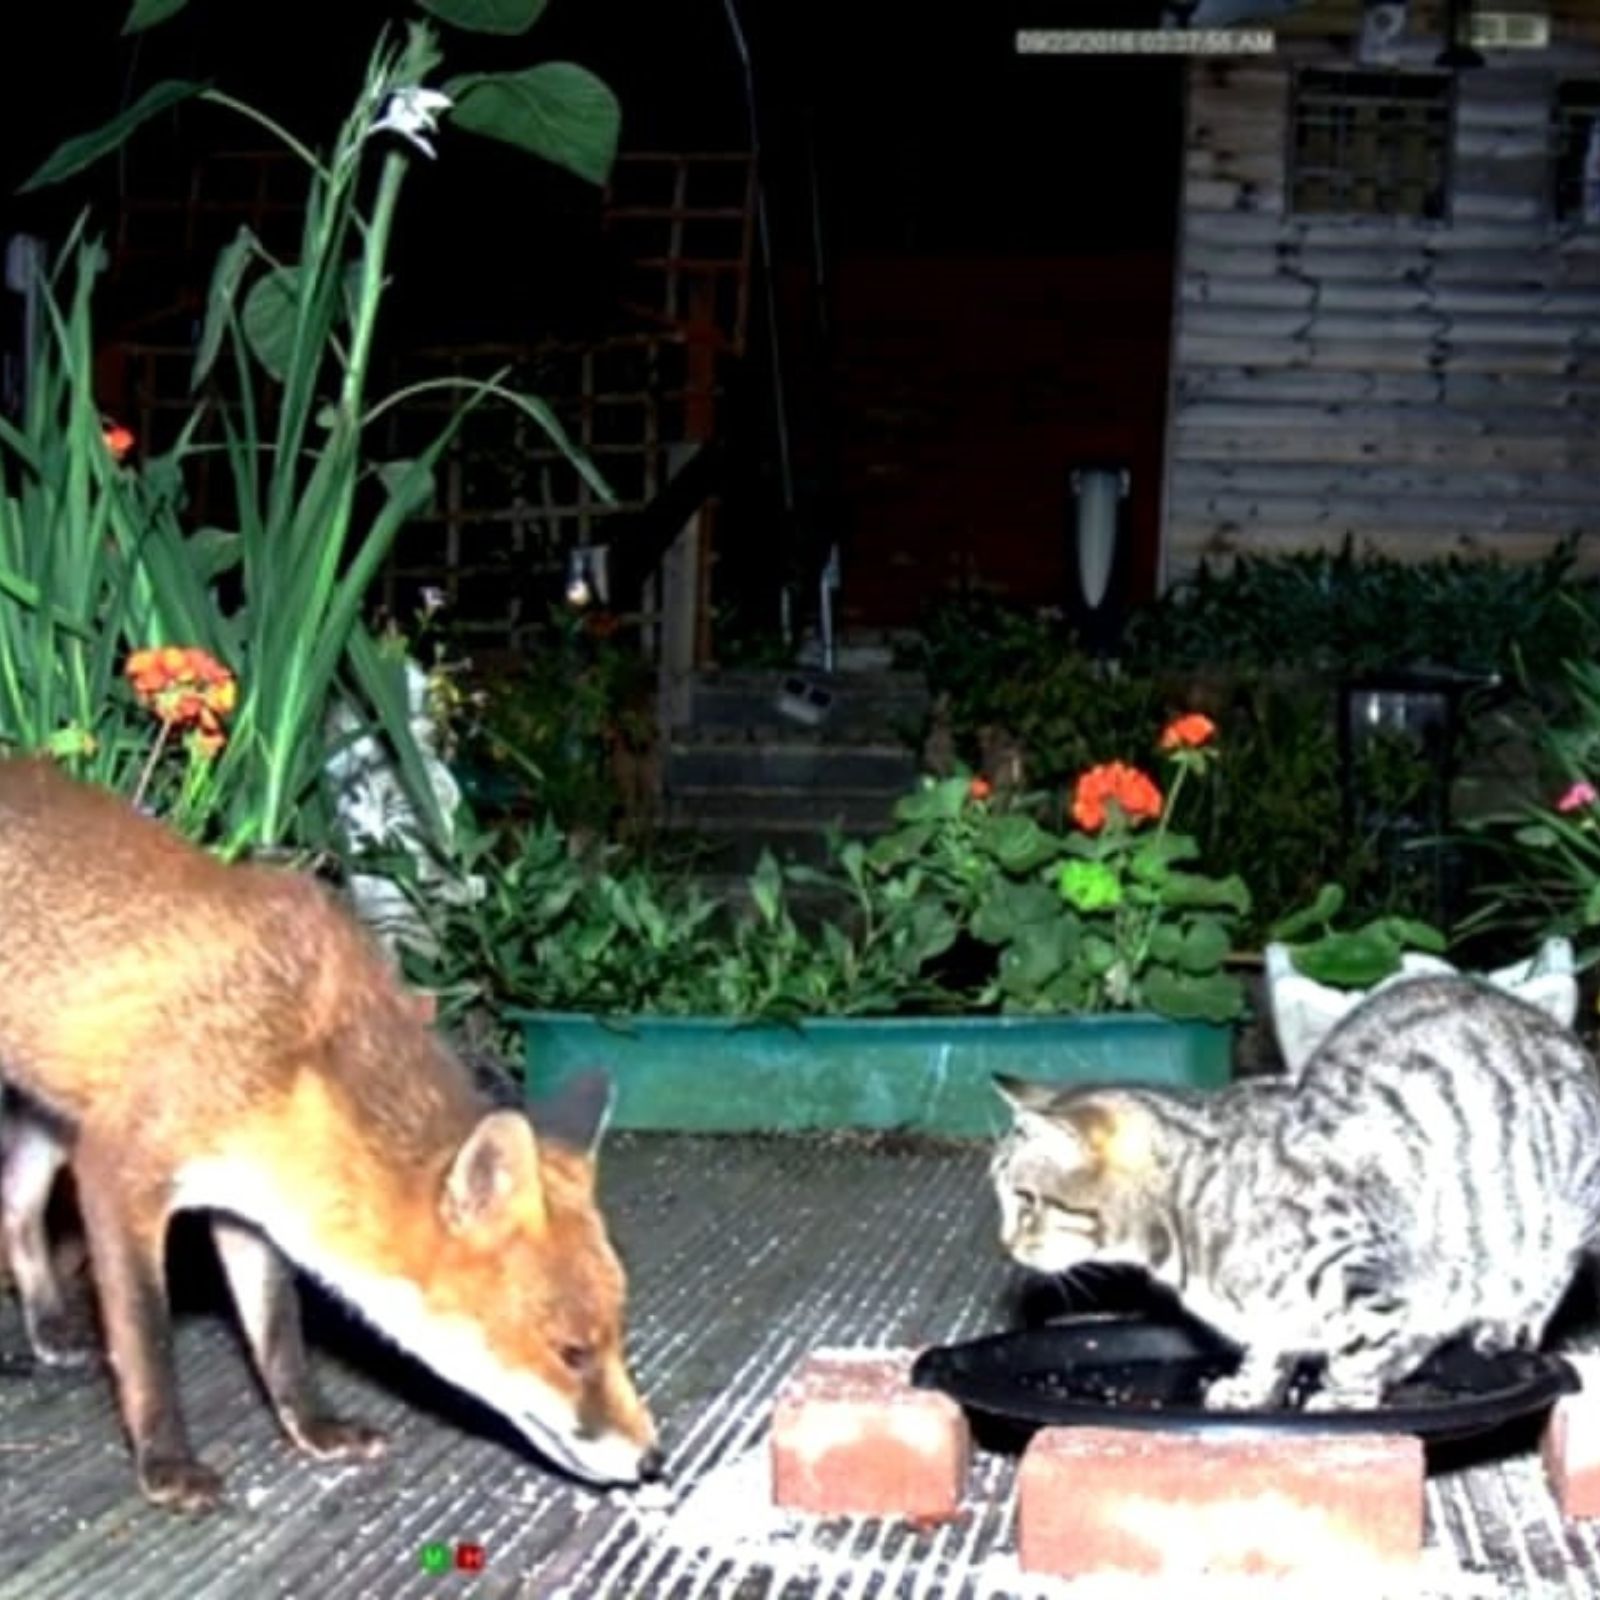 fox sniffing and cat sitting